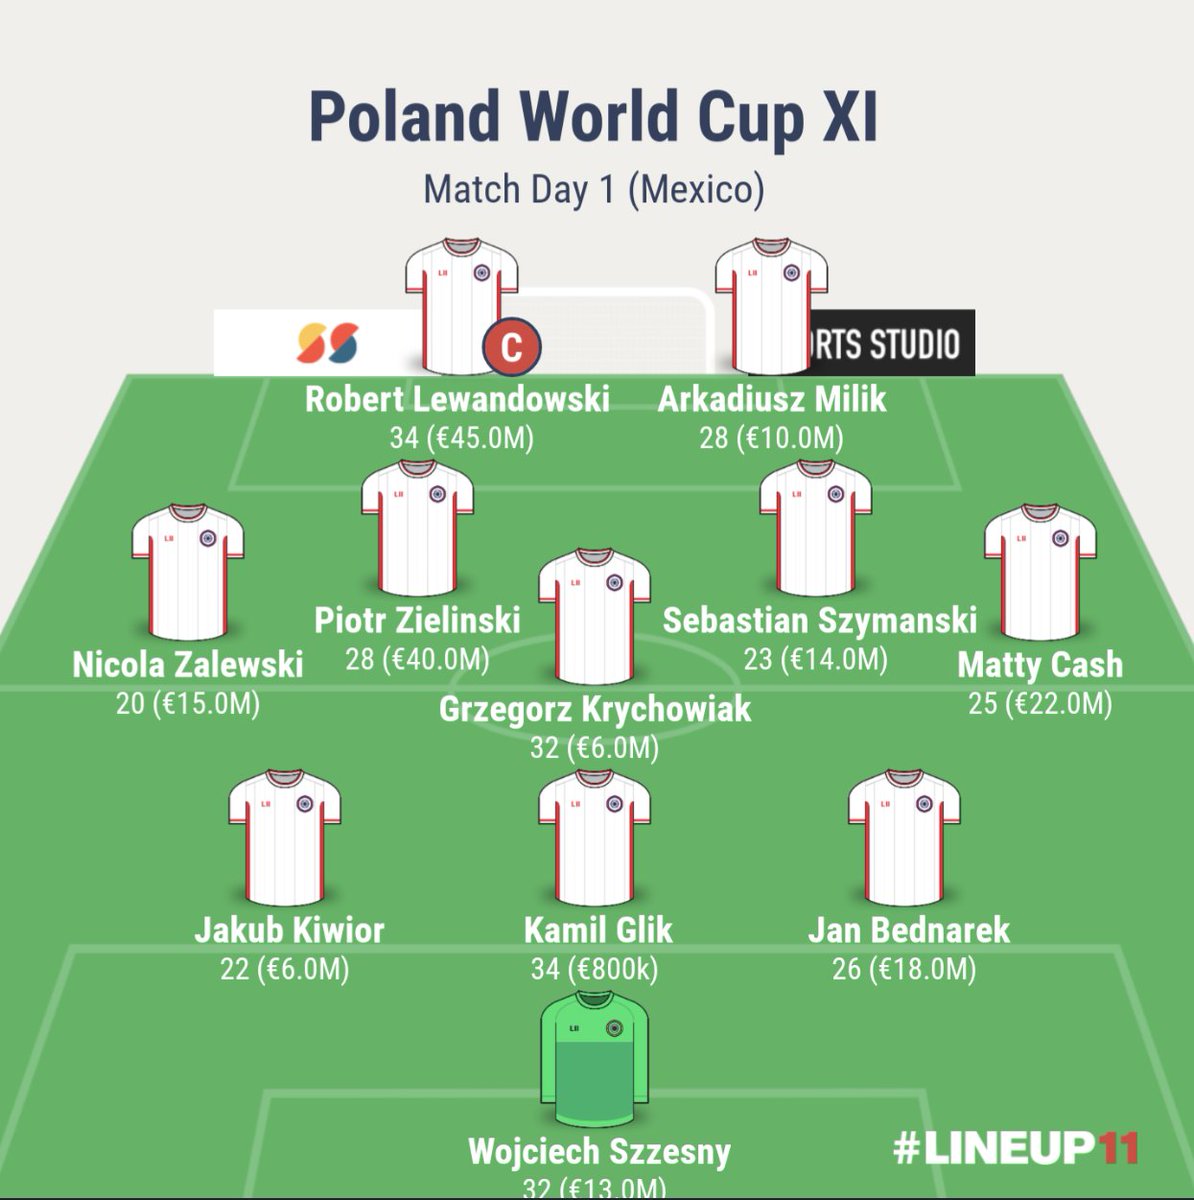 My starting XI I'd run out in a MUST win game for the Reprezentacja Polski. A win today for Poland almost solidifies a place in the R16

Need to come out AGGRESSIVE and press Mexico as they struggle very much under pressure. Let's get this win #KierunekKatar #FIFAWorldCup